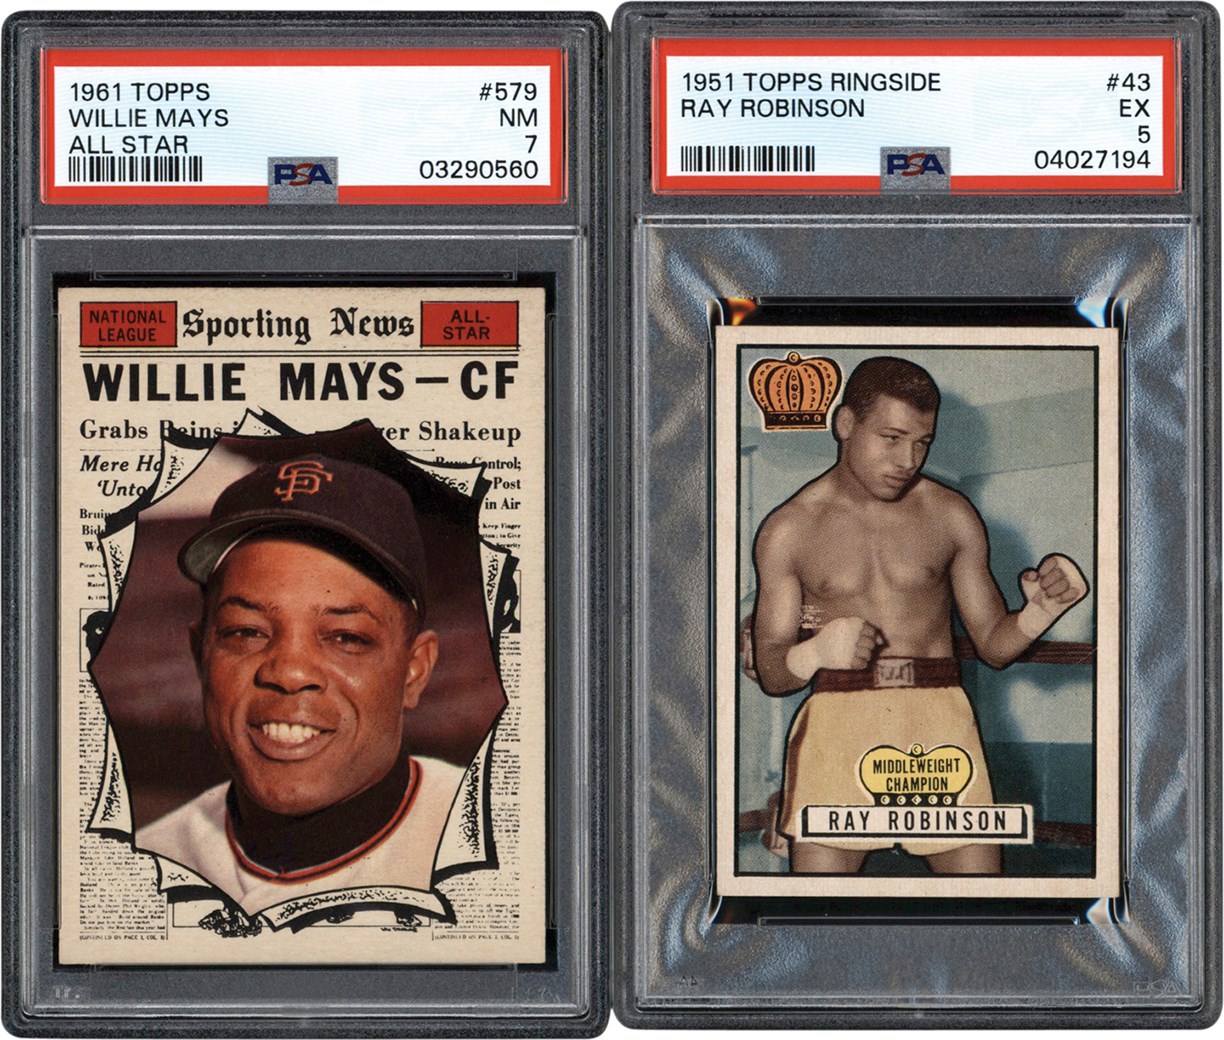 - 1947-1970 Topps & Bowman Multi-Sport Hall of Fame Collection (16)